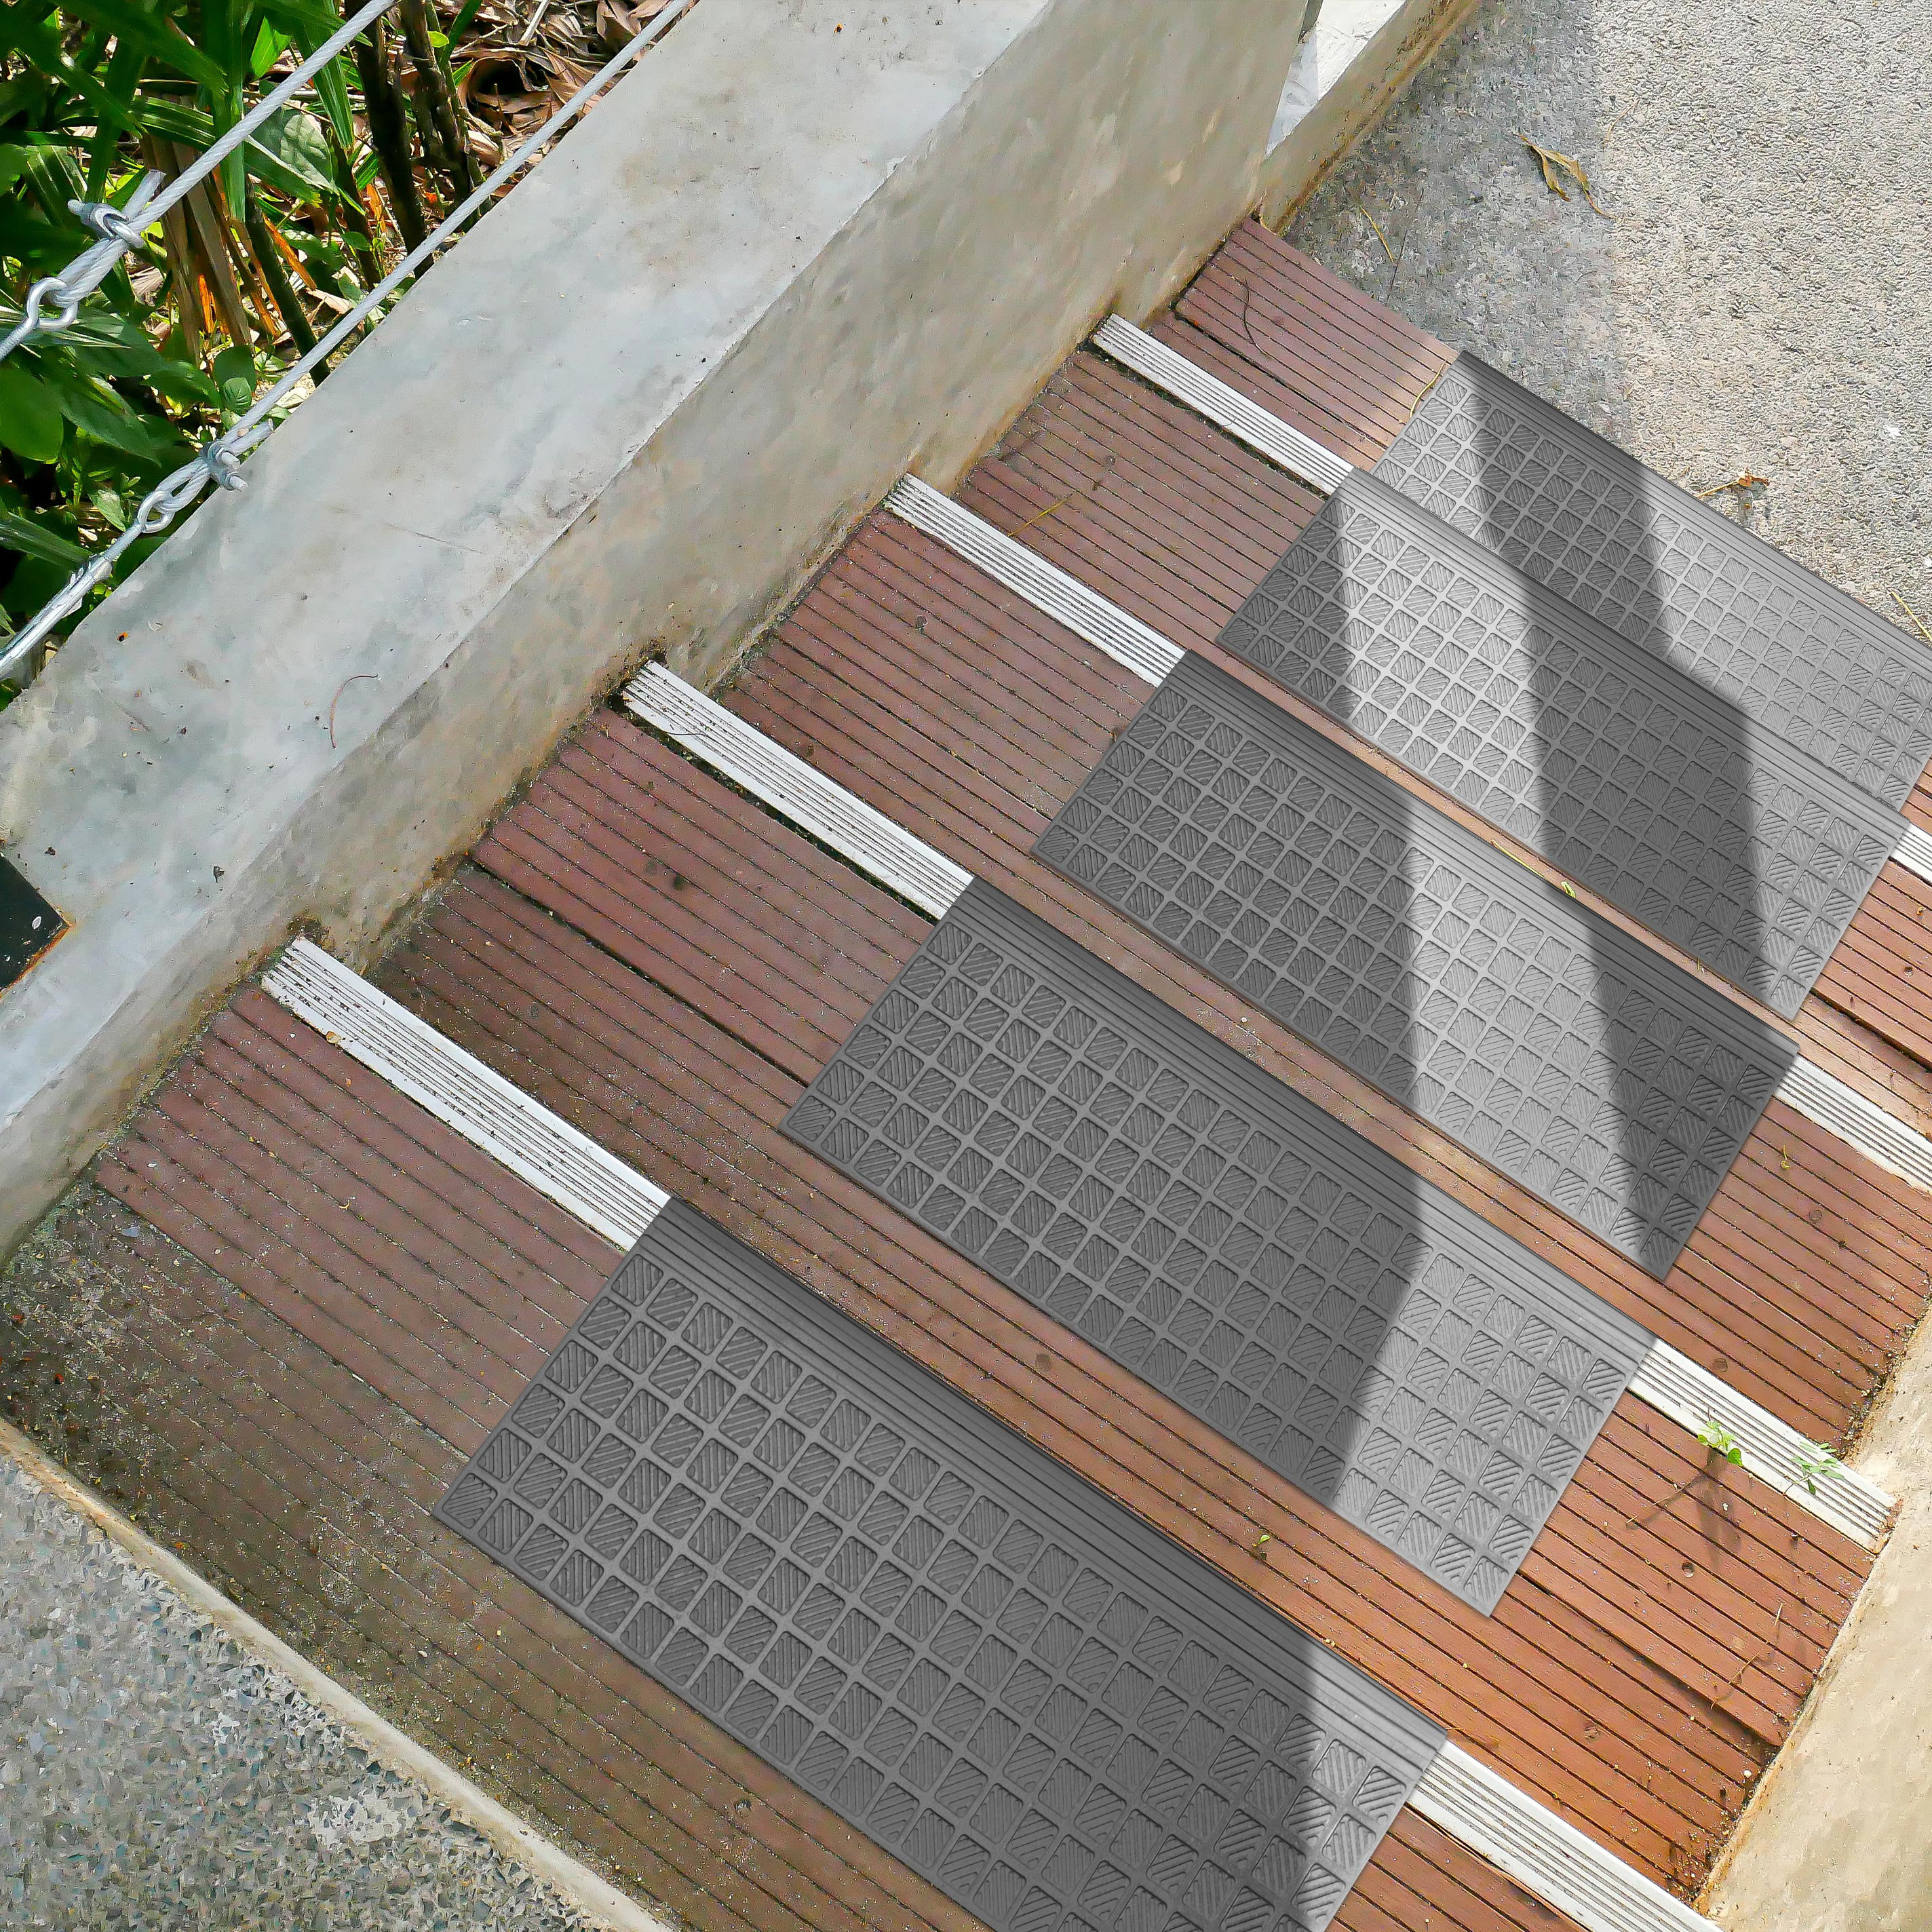 Outdoor Rubberback Black Checkers 10 in. x 25.5 in. Stair Tread Covers (Set of 5)